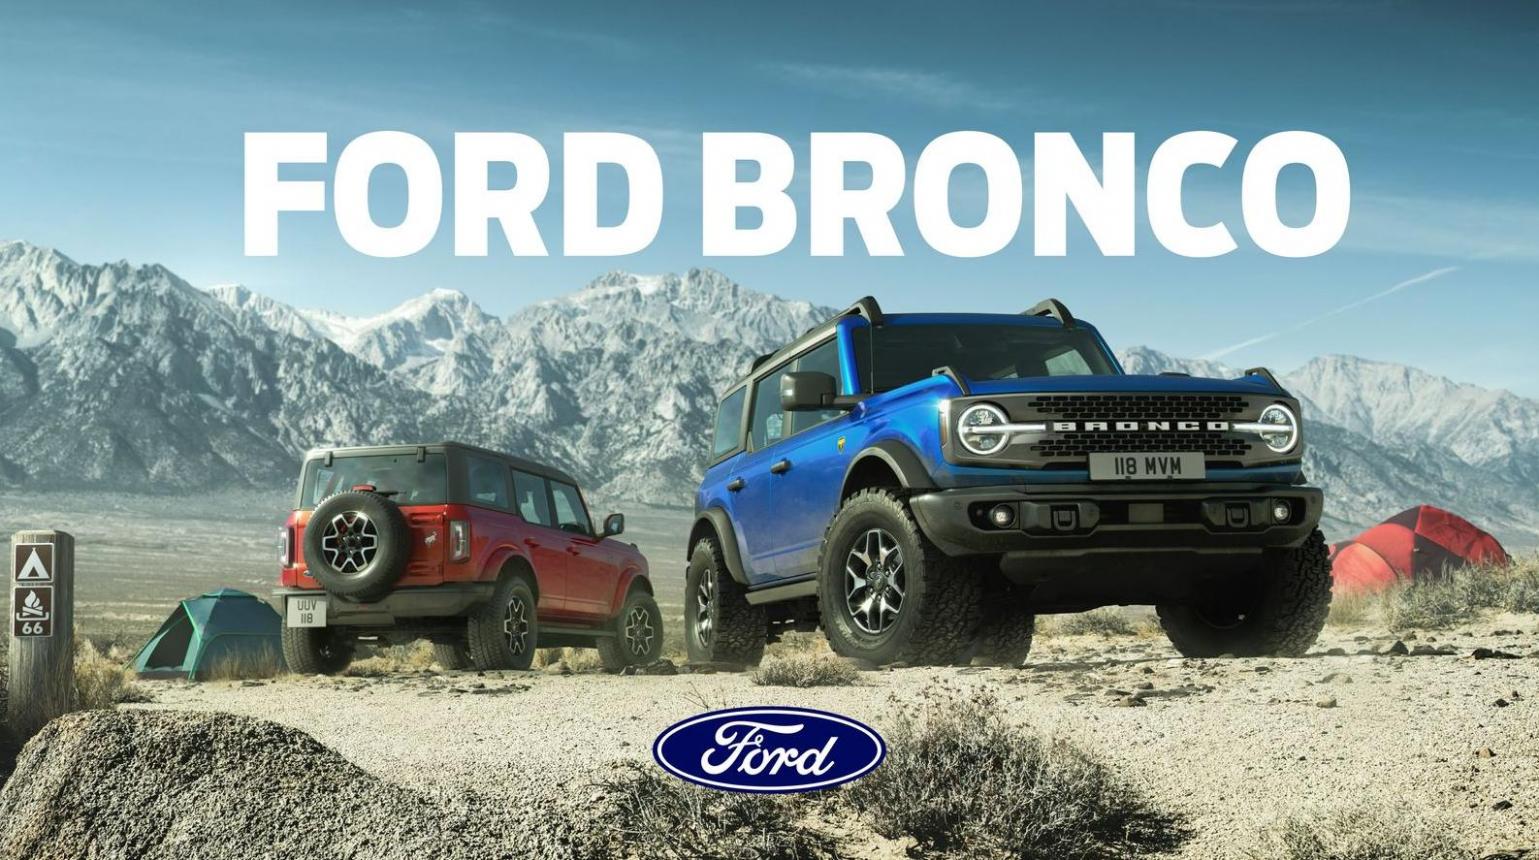 FORD BRONCO. Ford (2025-03-26-2025-03-26)